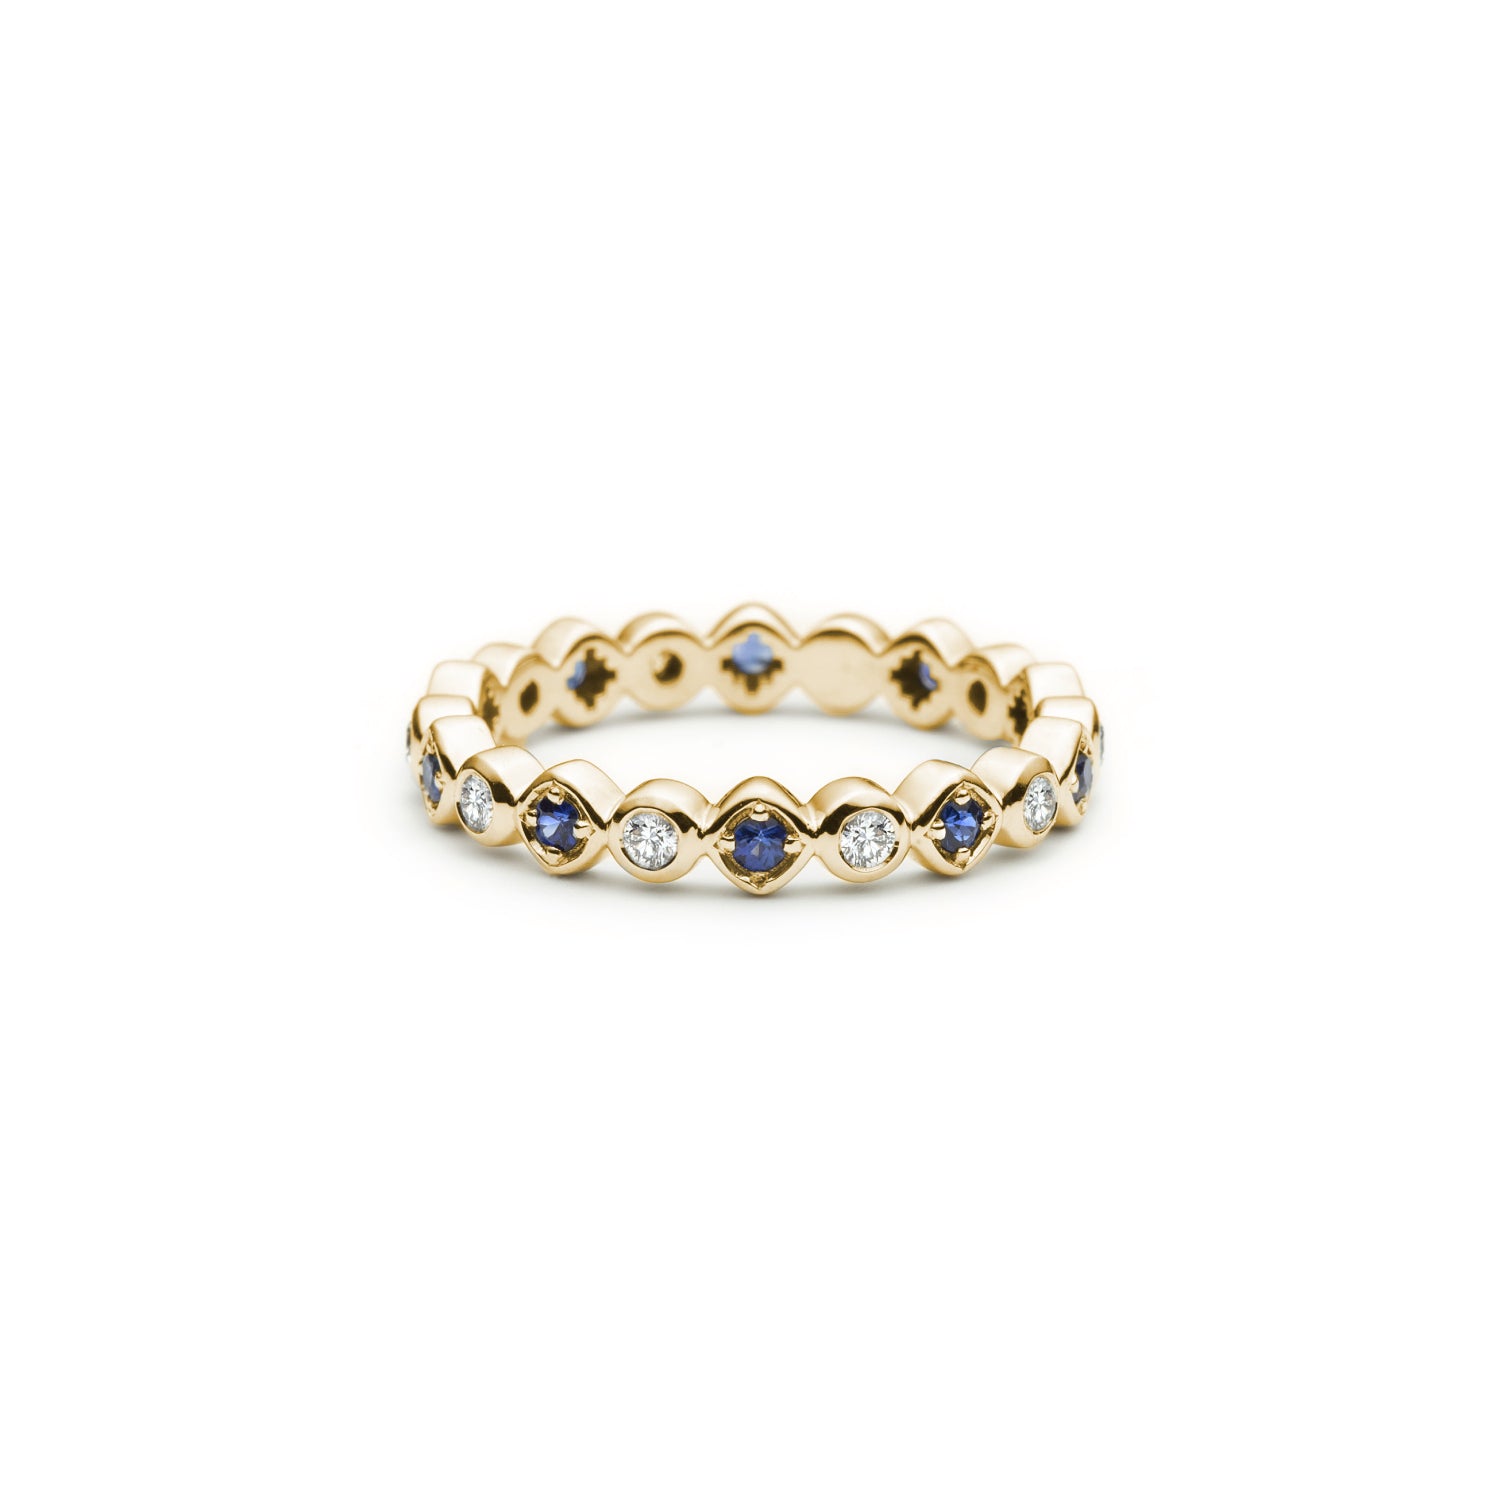 Alternating Round Brilliant Cut Diamond and Sapphire Eternity Ring in Yellow Gold